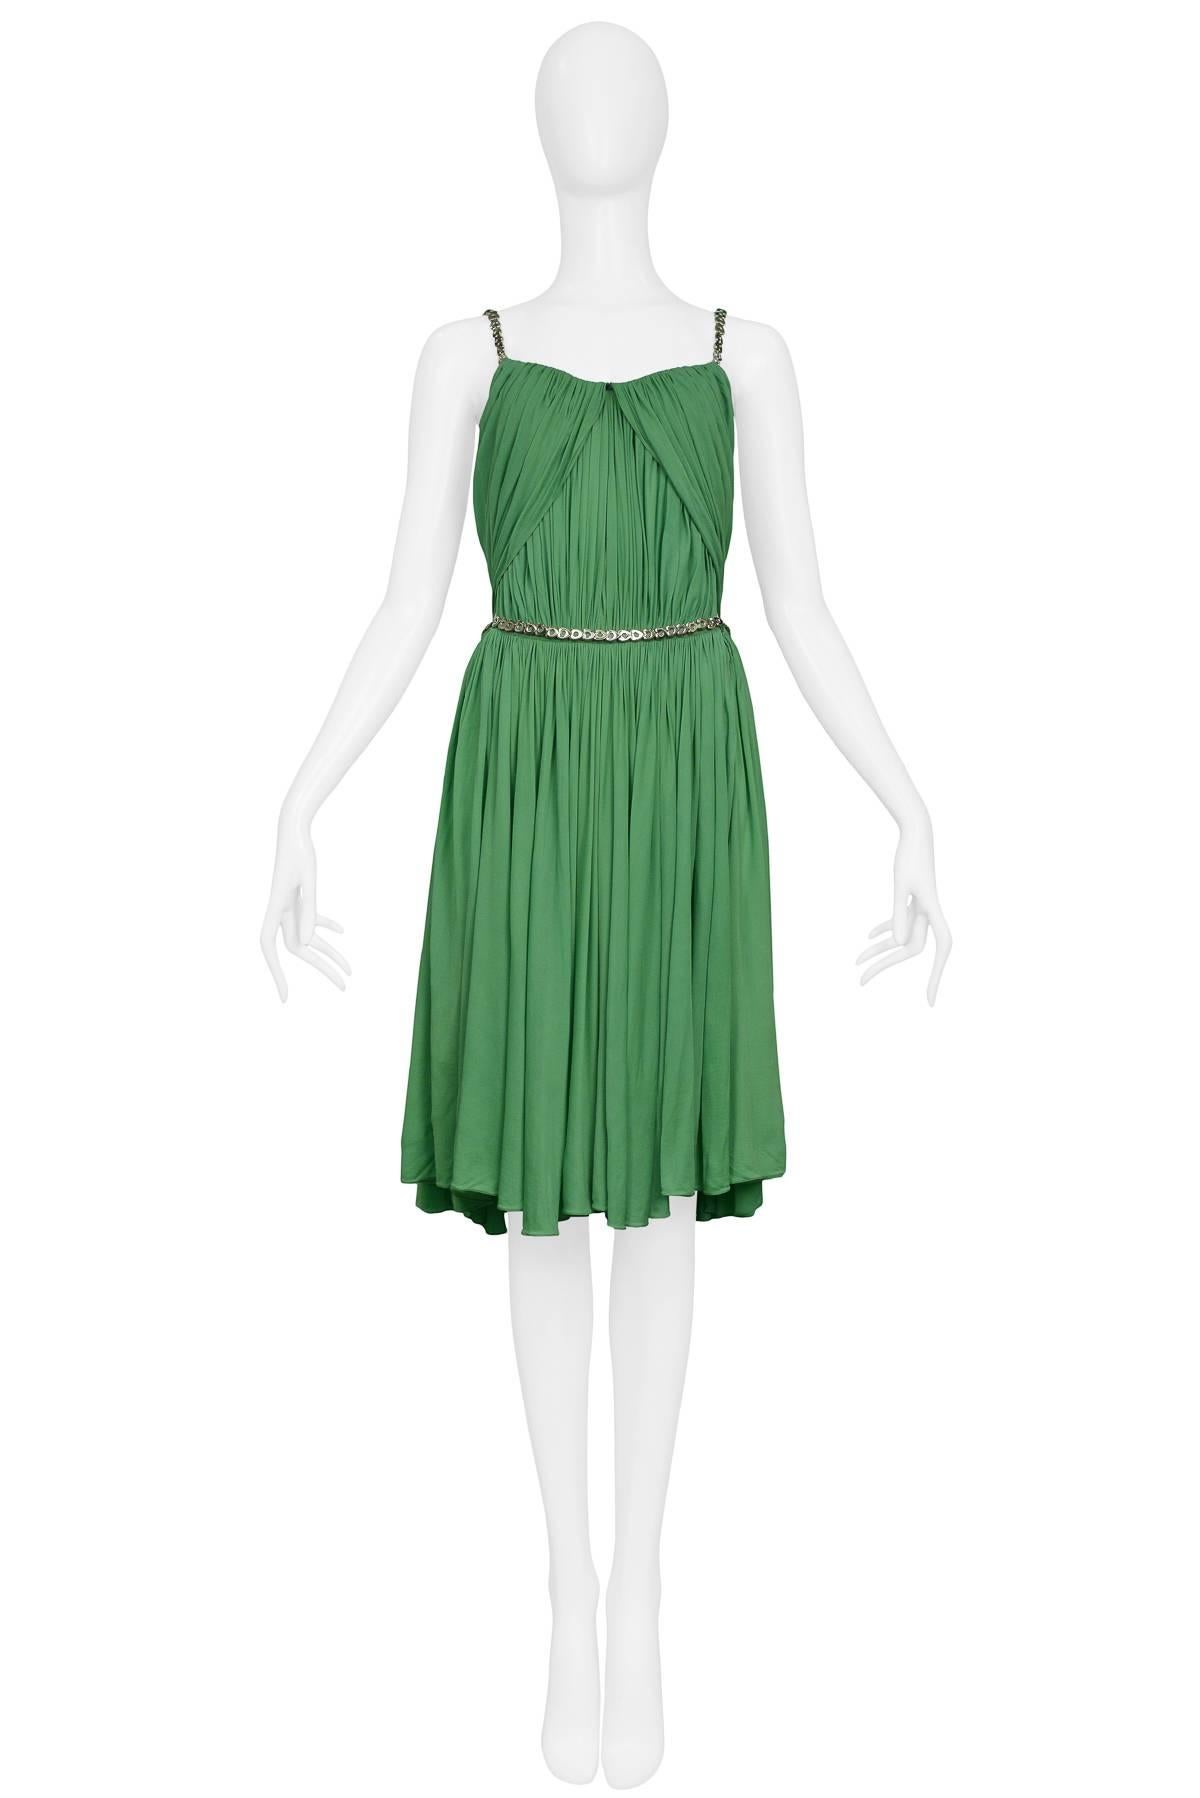 Vintage Azzedine Alaia green goddess mini dress with silver hardware at straps, side cutouts, and metal waist belt. 

